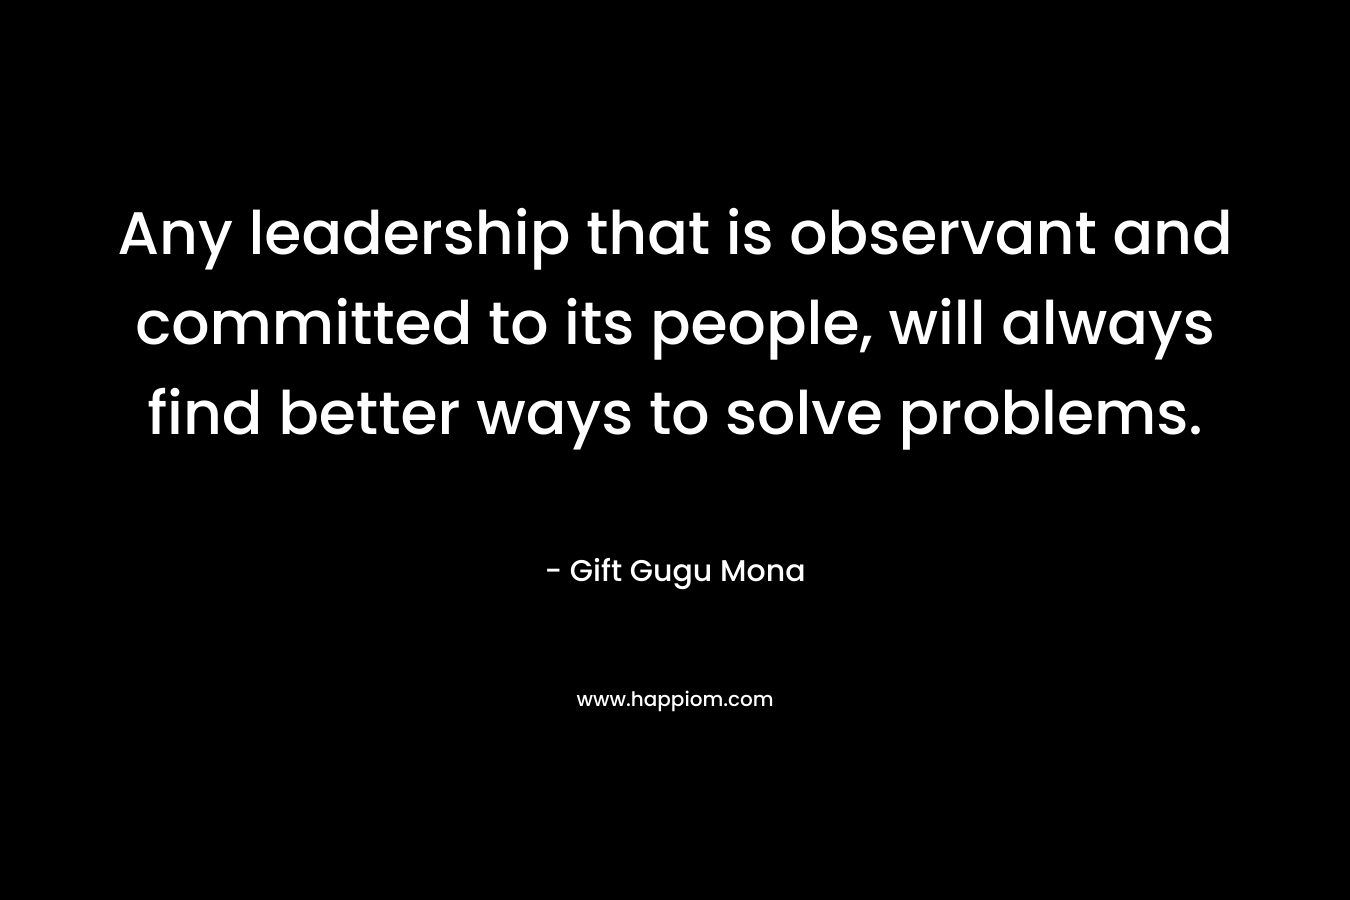 Any leadership that is observant and committed to its people, will always find better ways to solve problems.